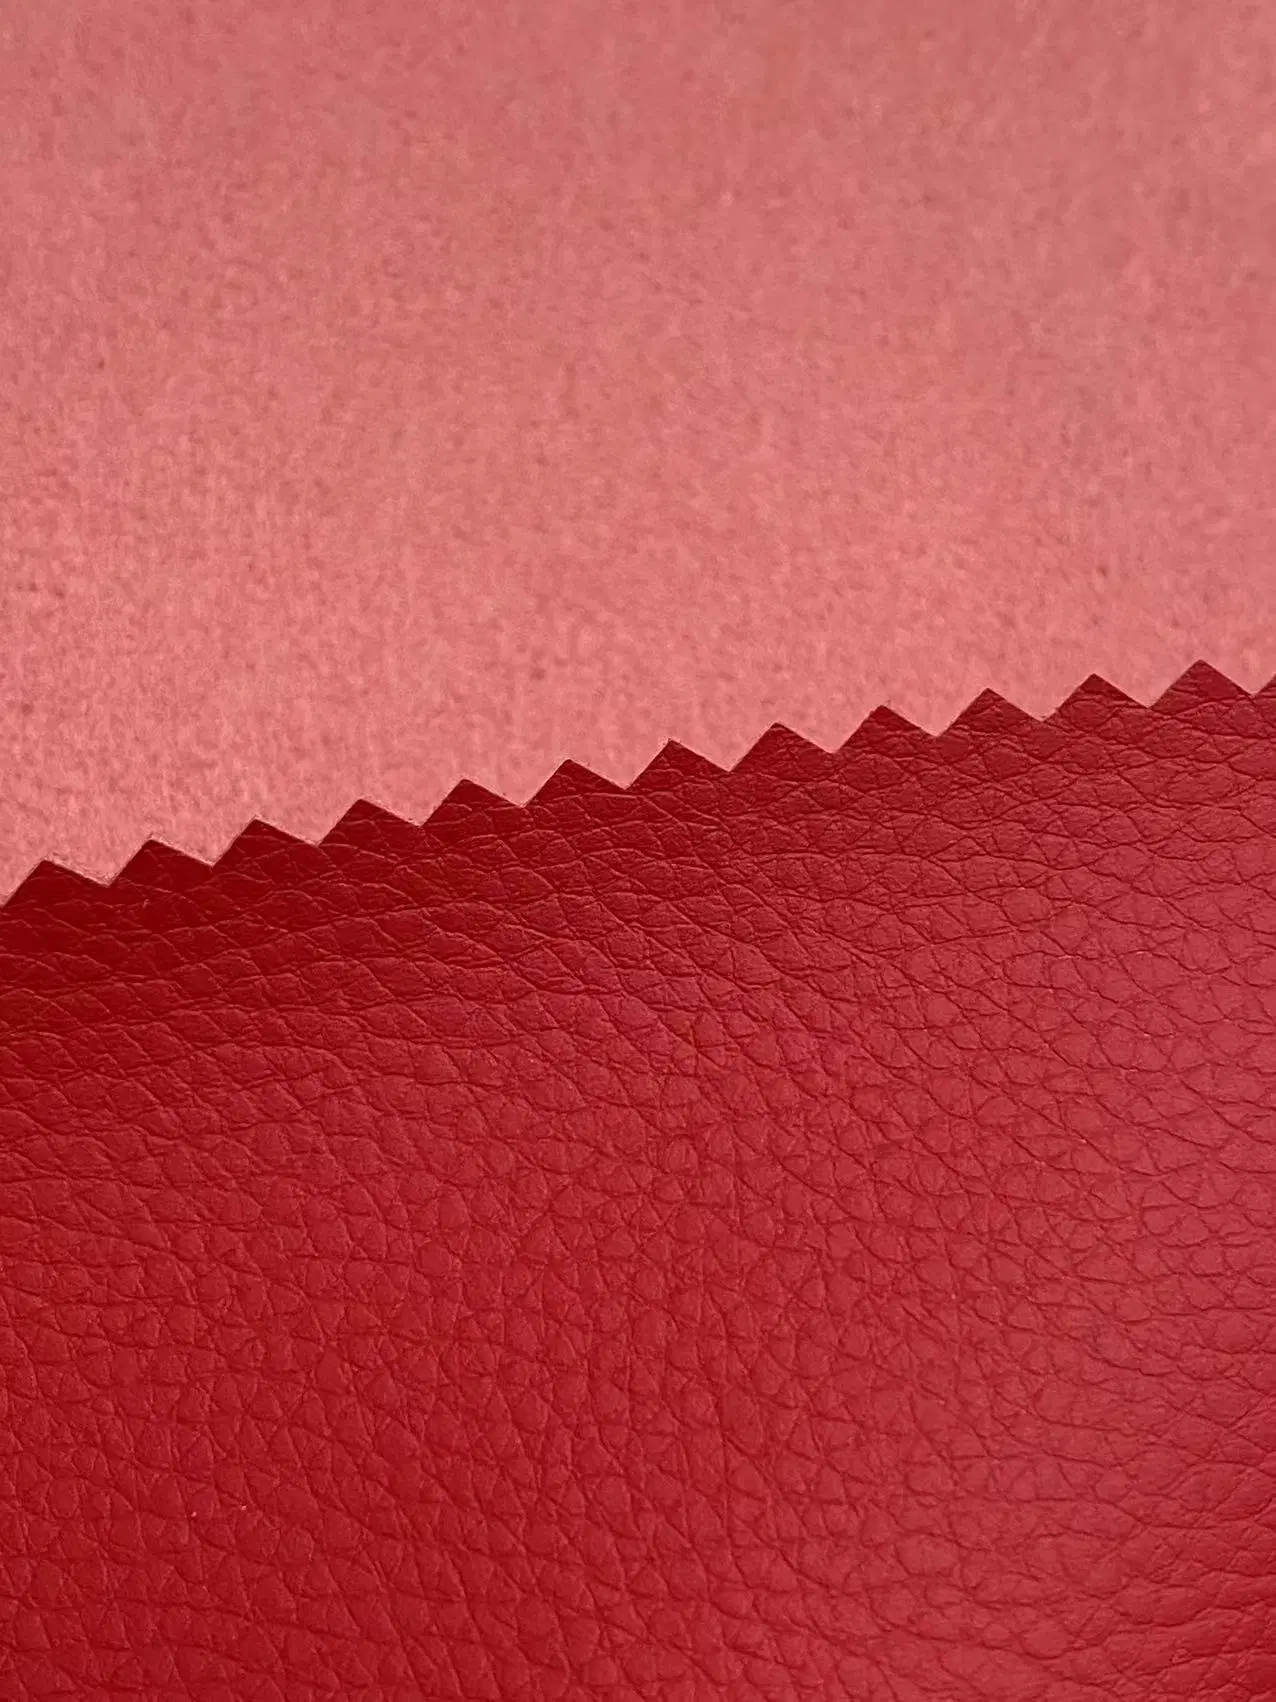 Coated Nylon Fabric Microfibre Leather Huafon High quality/High cost performance  Goods Reinforcement Nonwoven